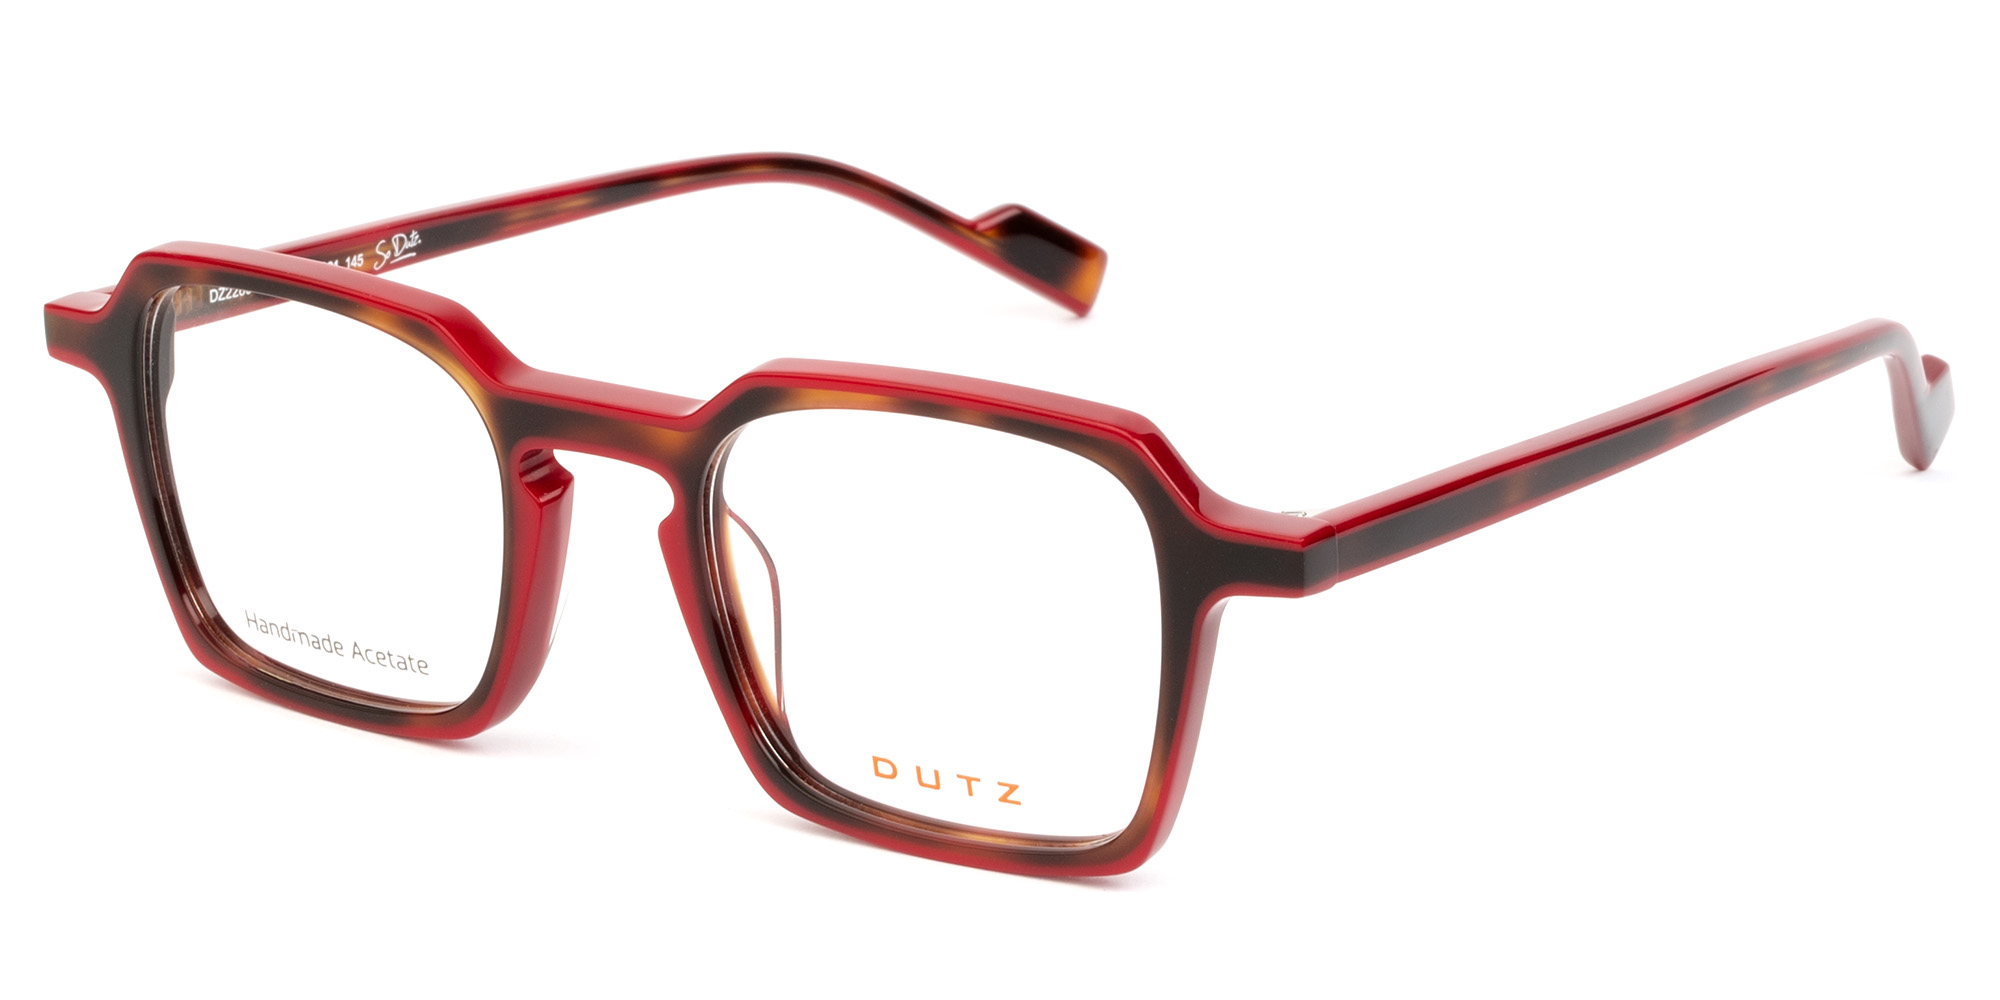 Bi-color, red combined with brown, acetate frame and matching color temples